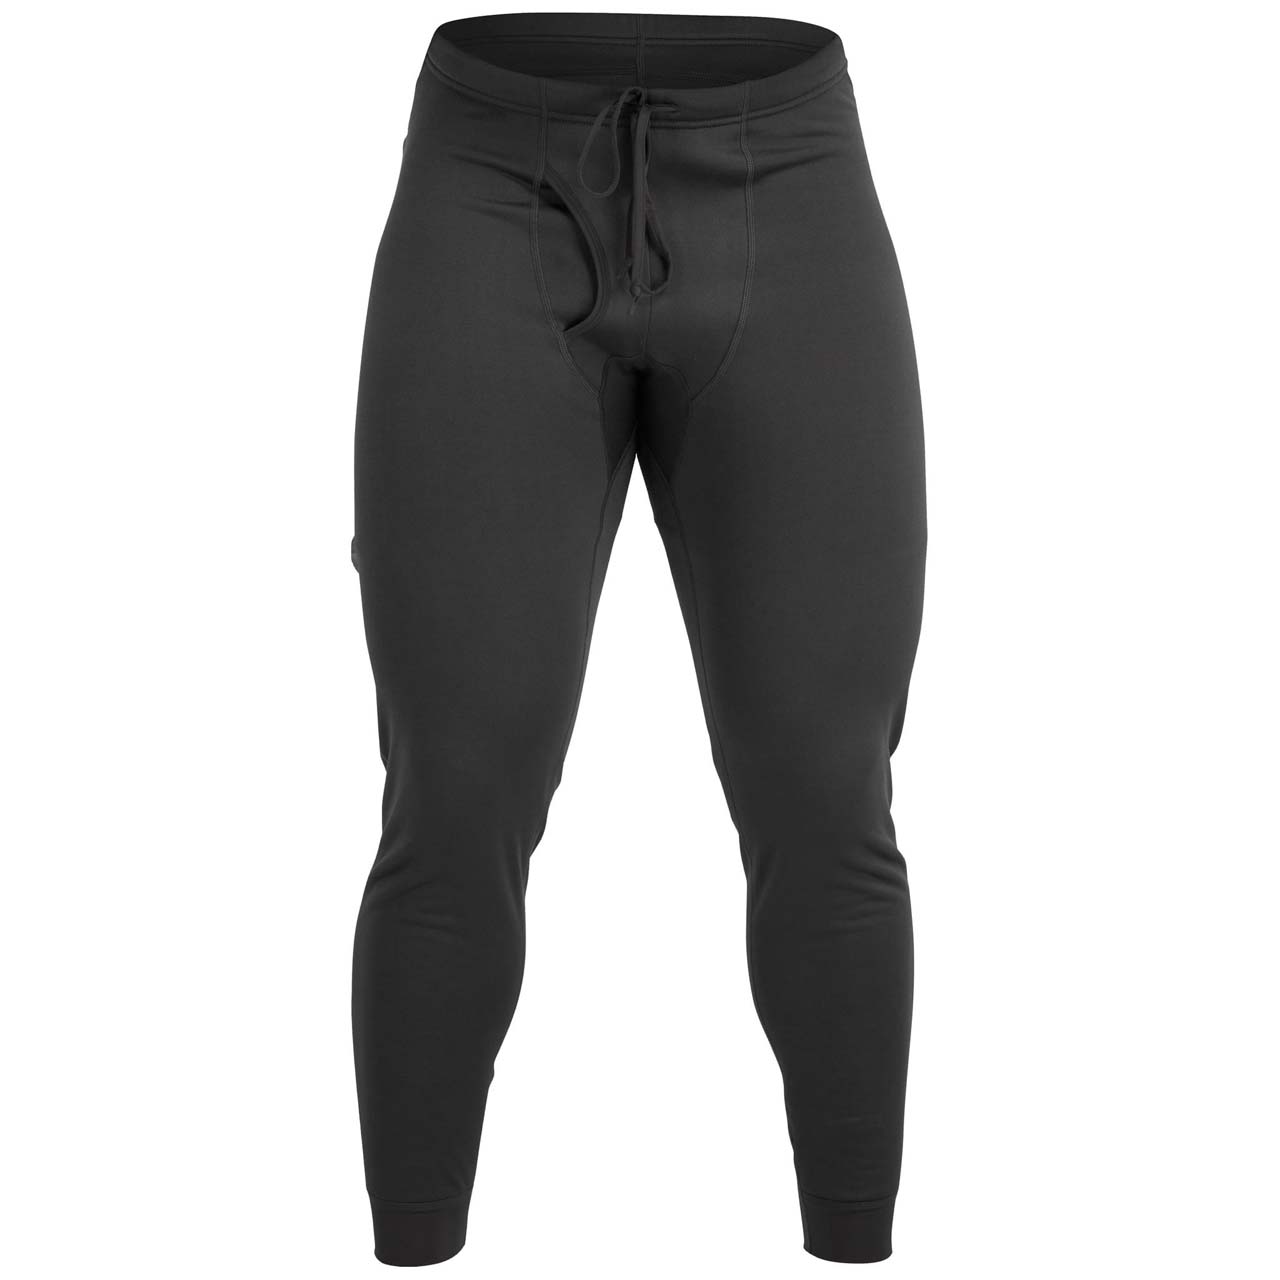 NRS Expedition Weight Pant - Graphite, S von NRS}